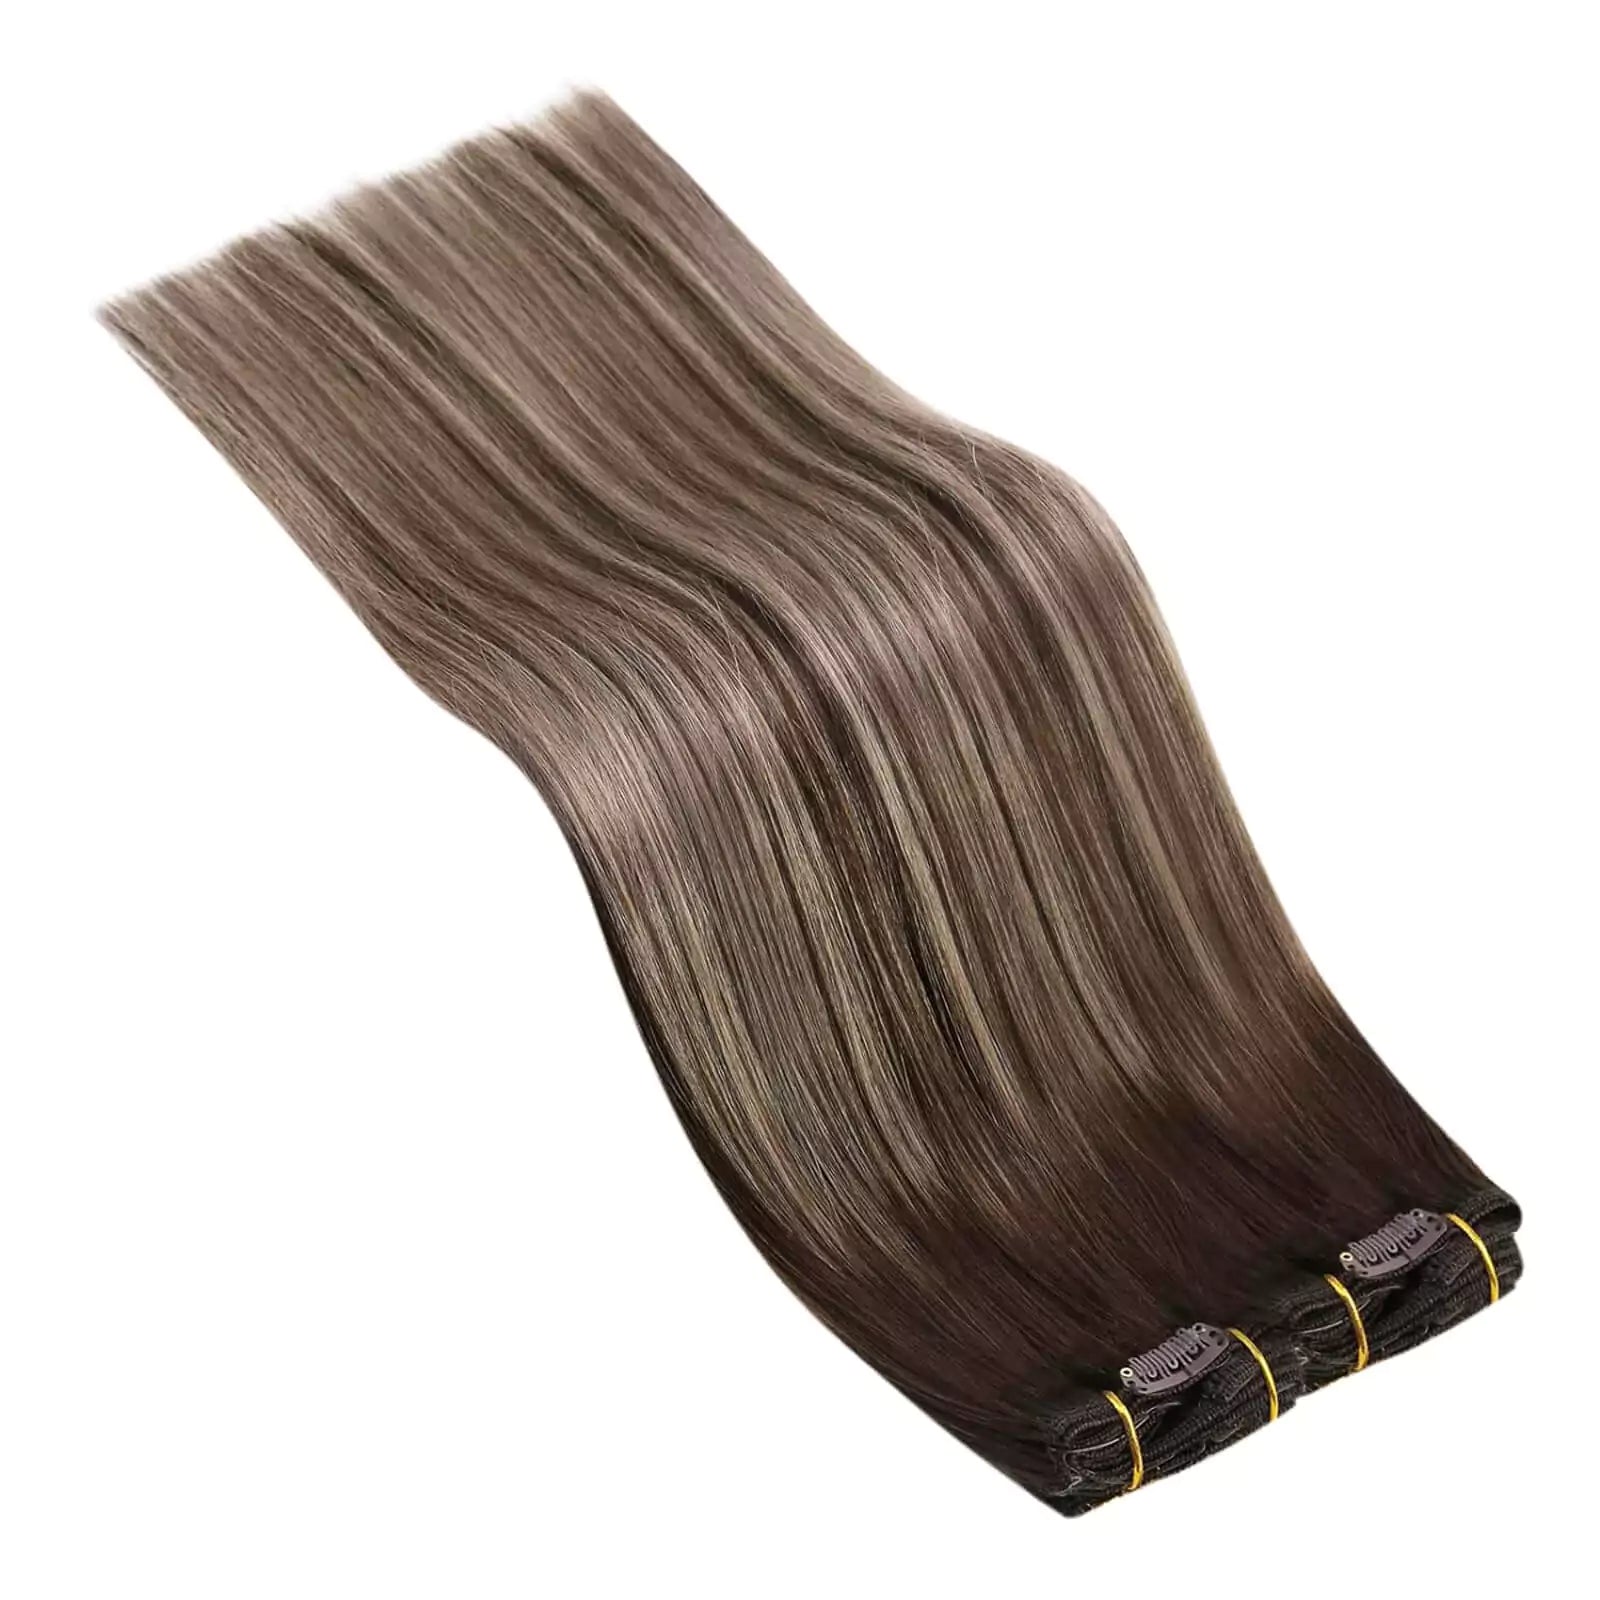 Clip in Hair Extensions Blonde 22inch Full Head Clip in Hair Extensions